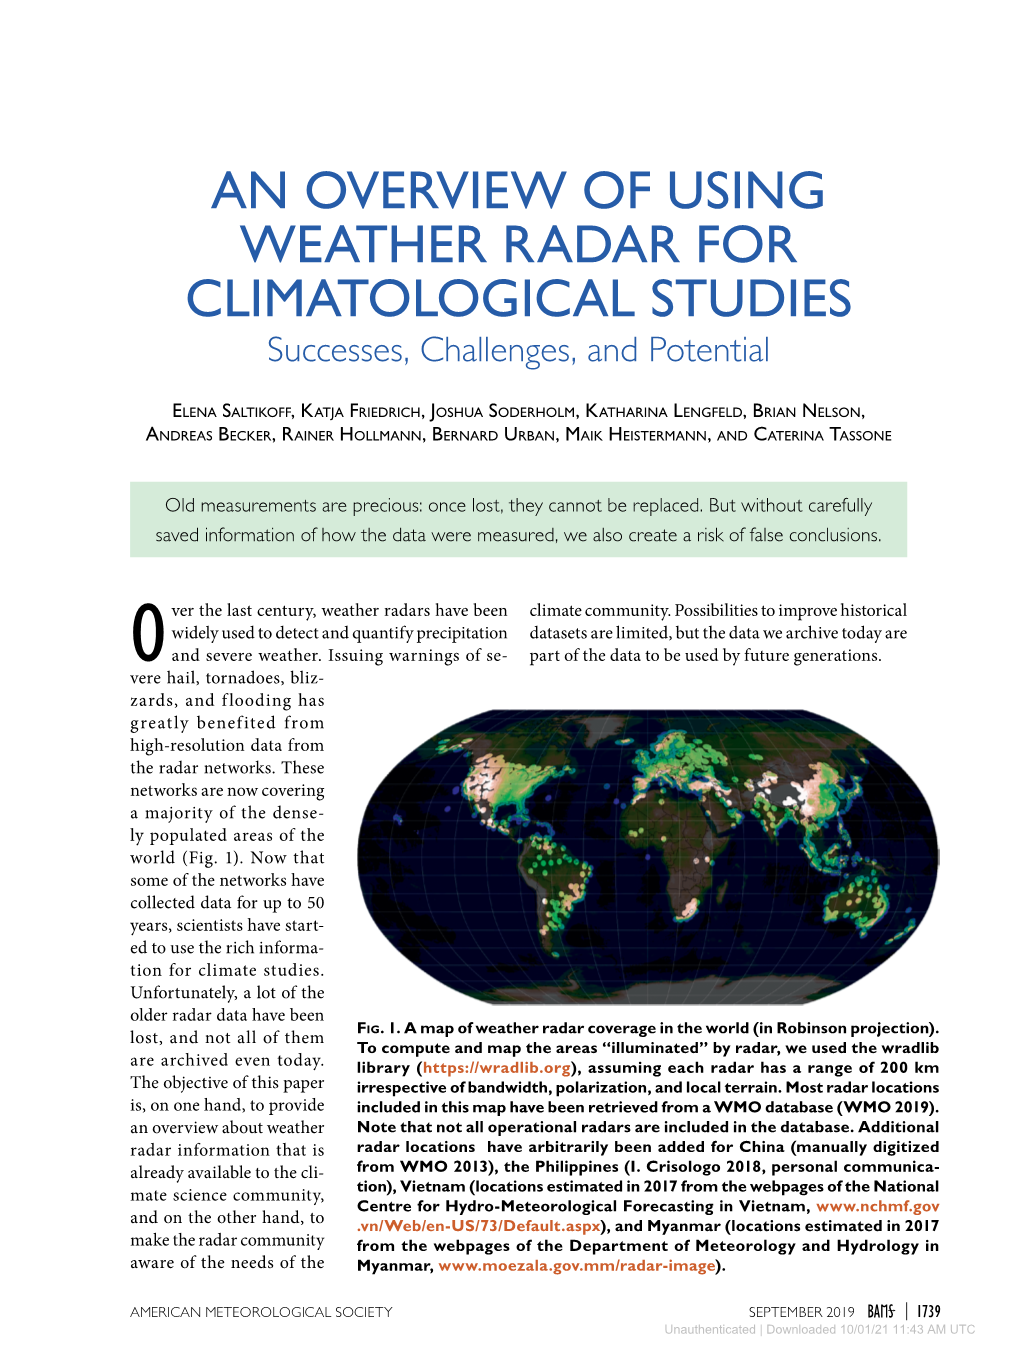 AN OVERVIEW of USING WEATHER RADAR for CLIMATOLOGICAL STUDIES Successes, Challenges, and Potential